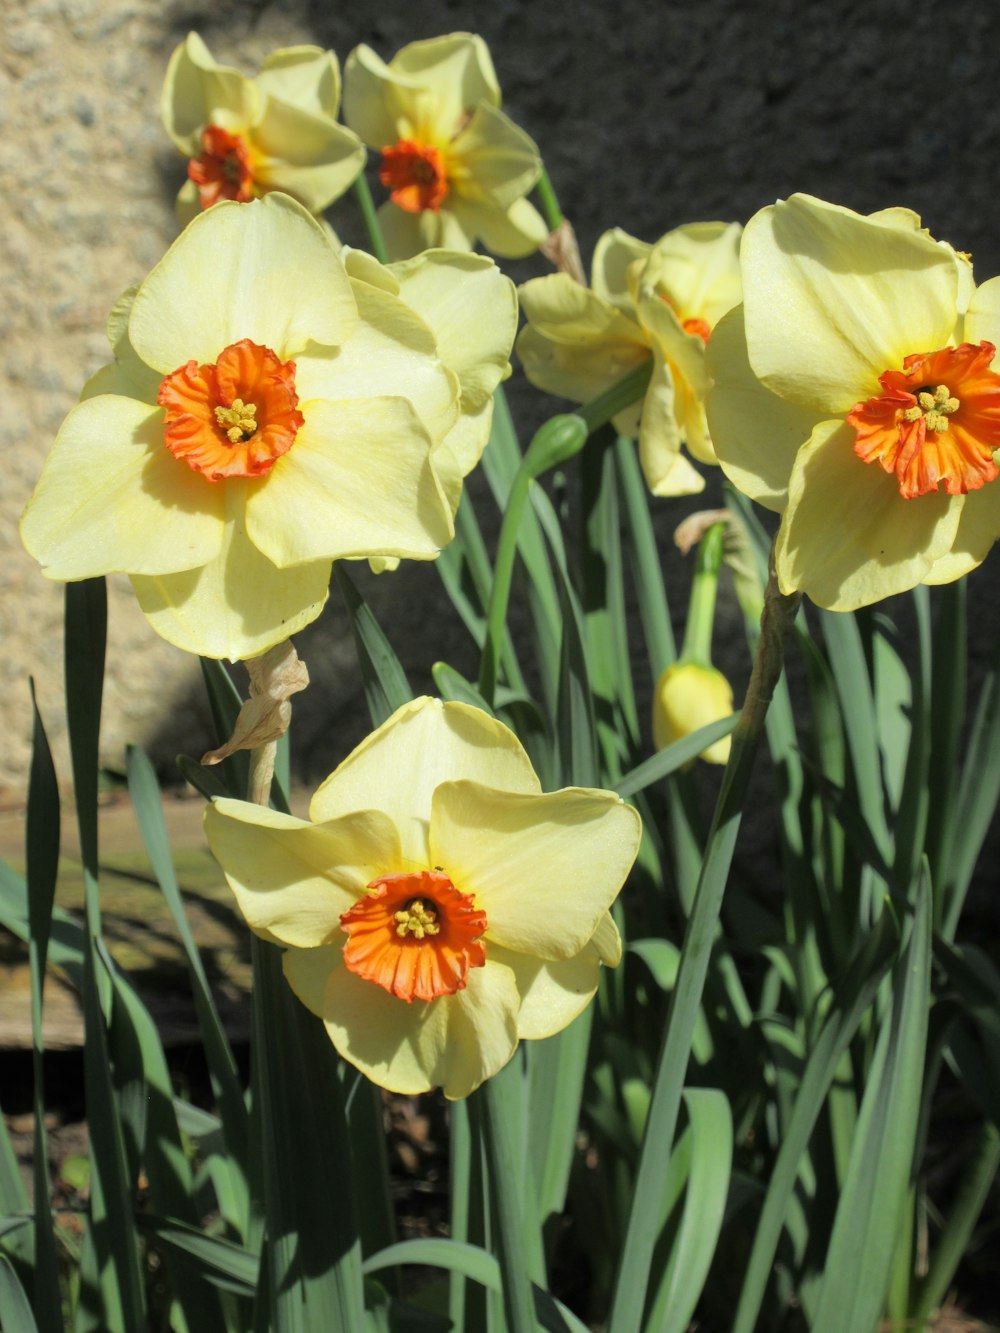 a group of yellow flowers with orange centers